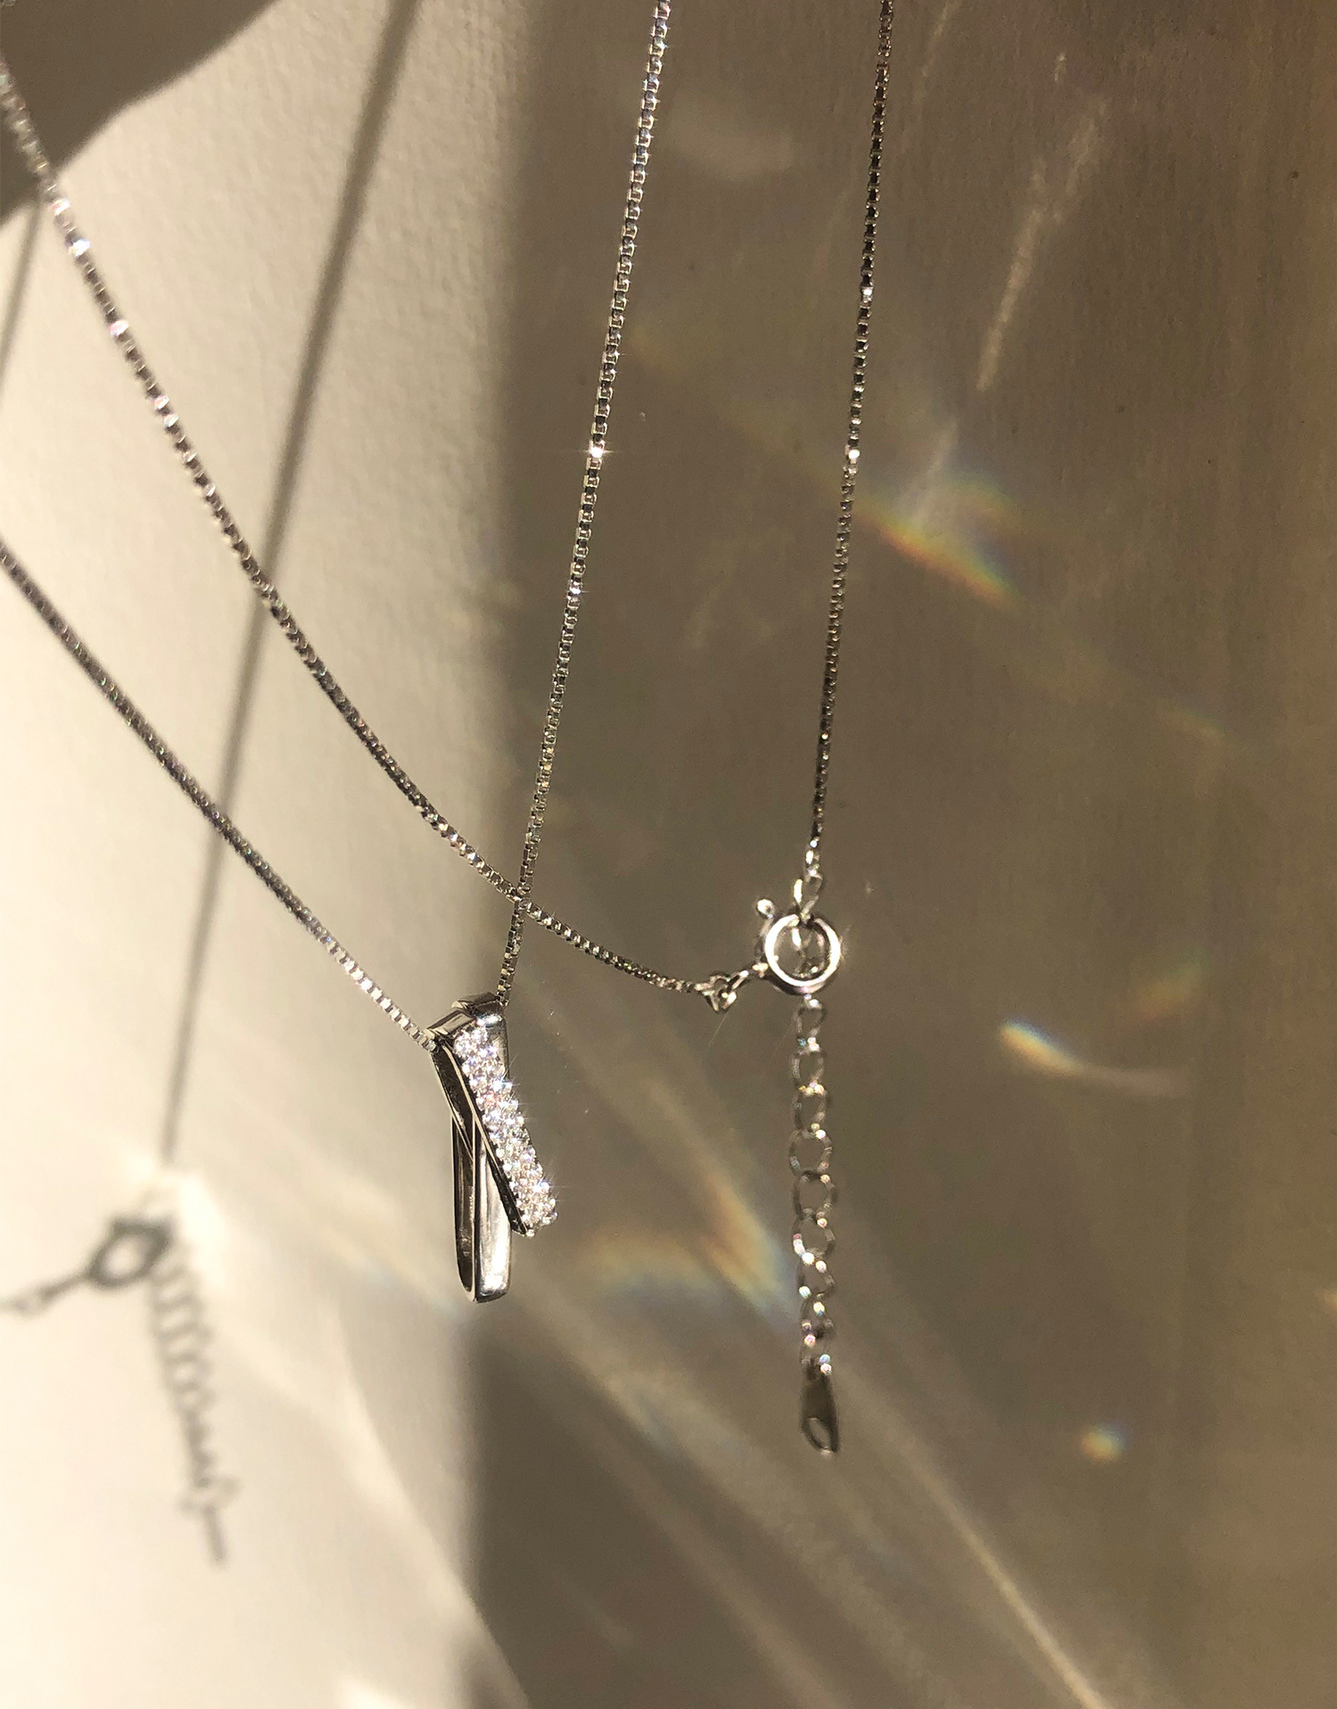 Children's, Teens' and Mothers' Necklaces:  Sterling Silver Minimalist CZ Necklaces